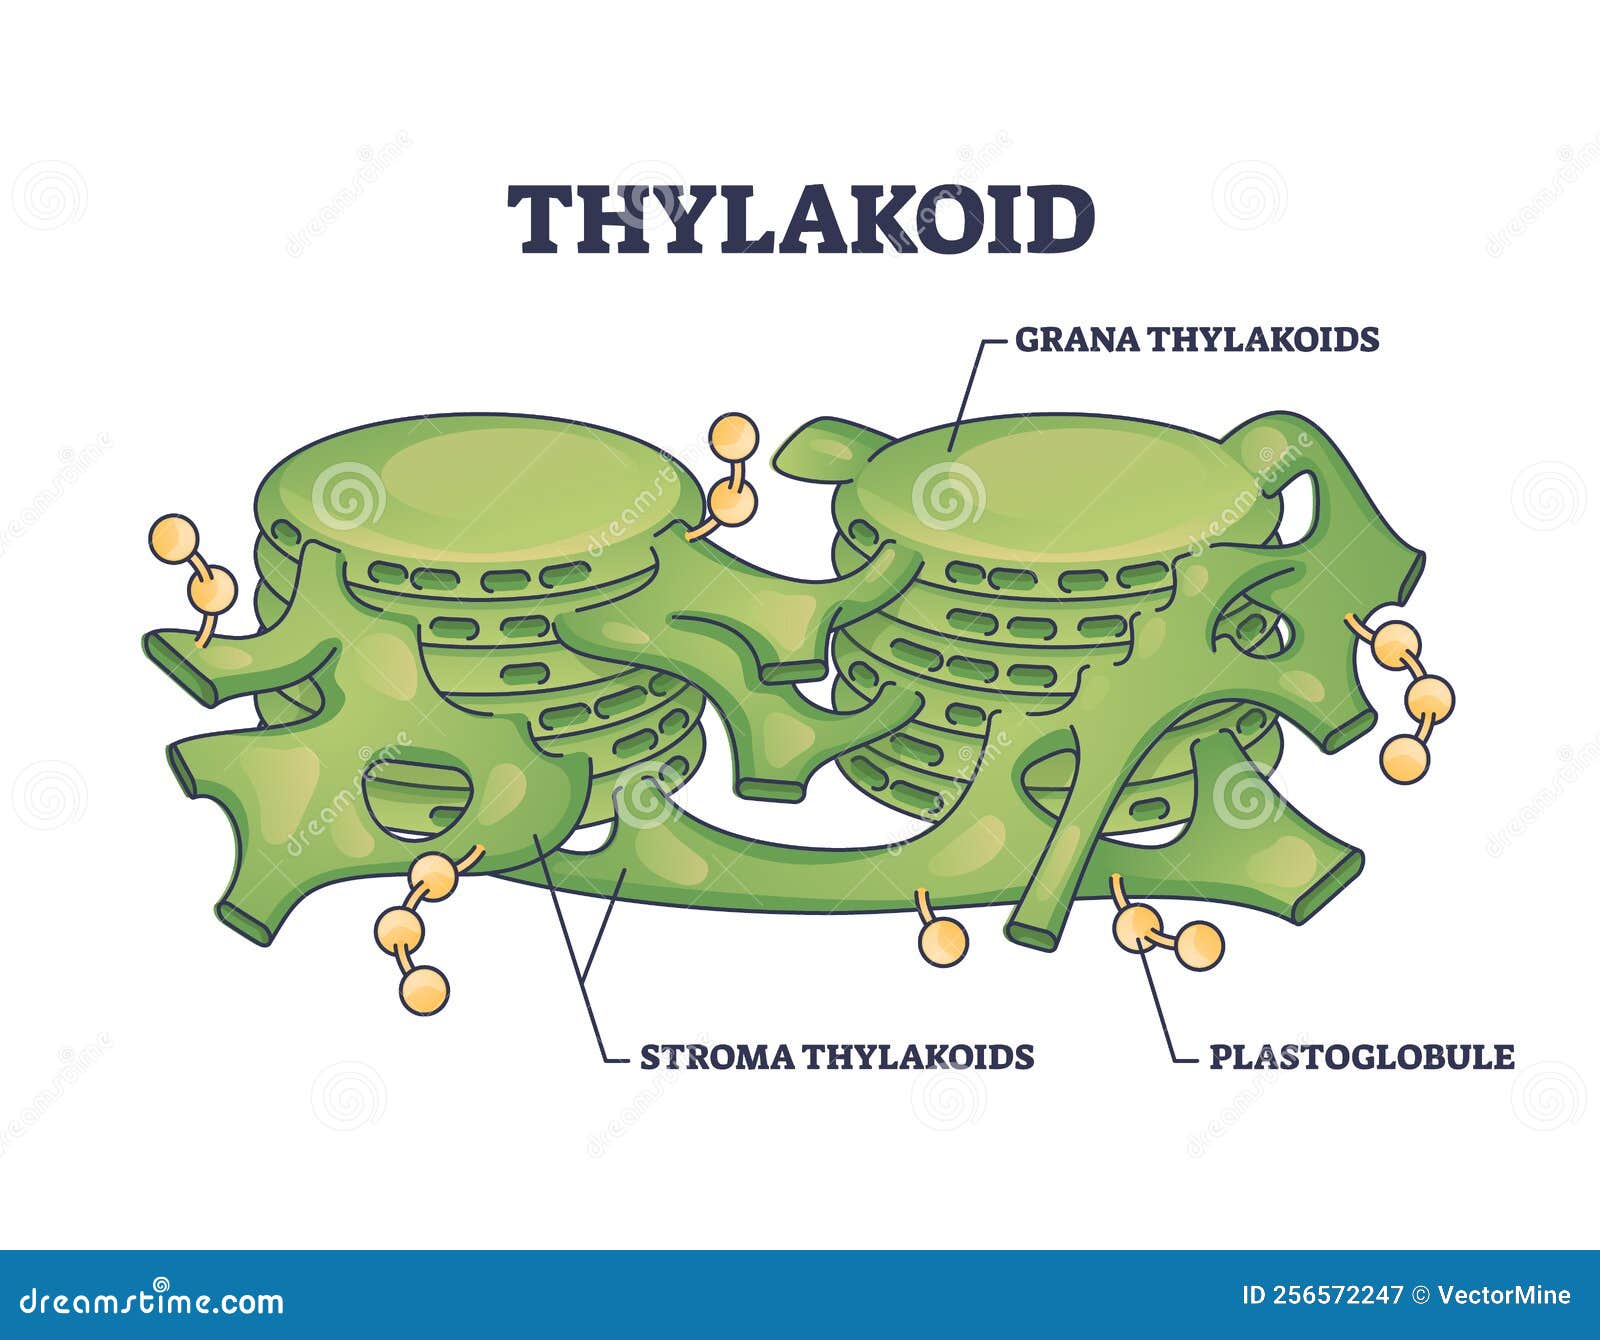 thylakoid membrane bound chloroplast compartments structure outline diagram